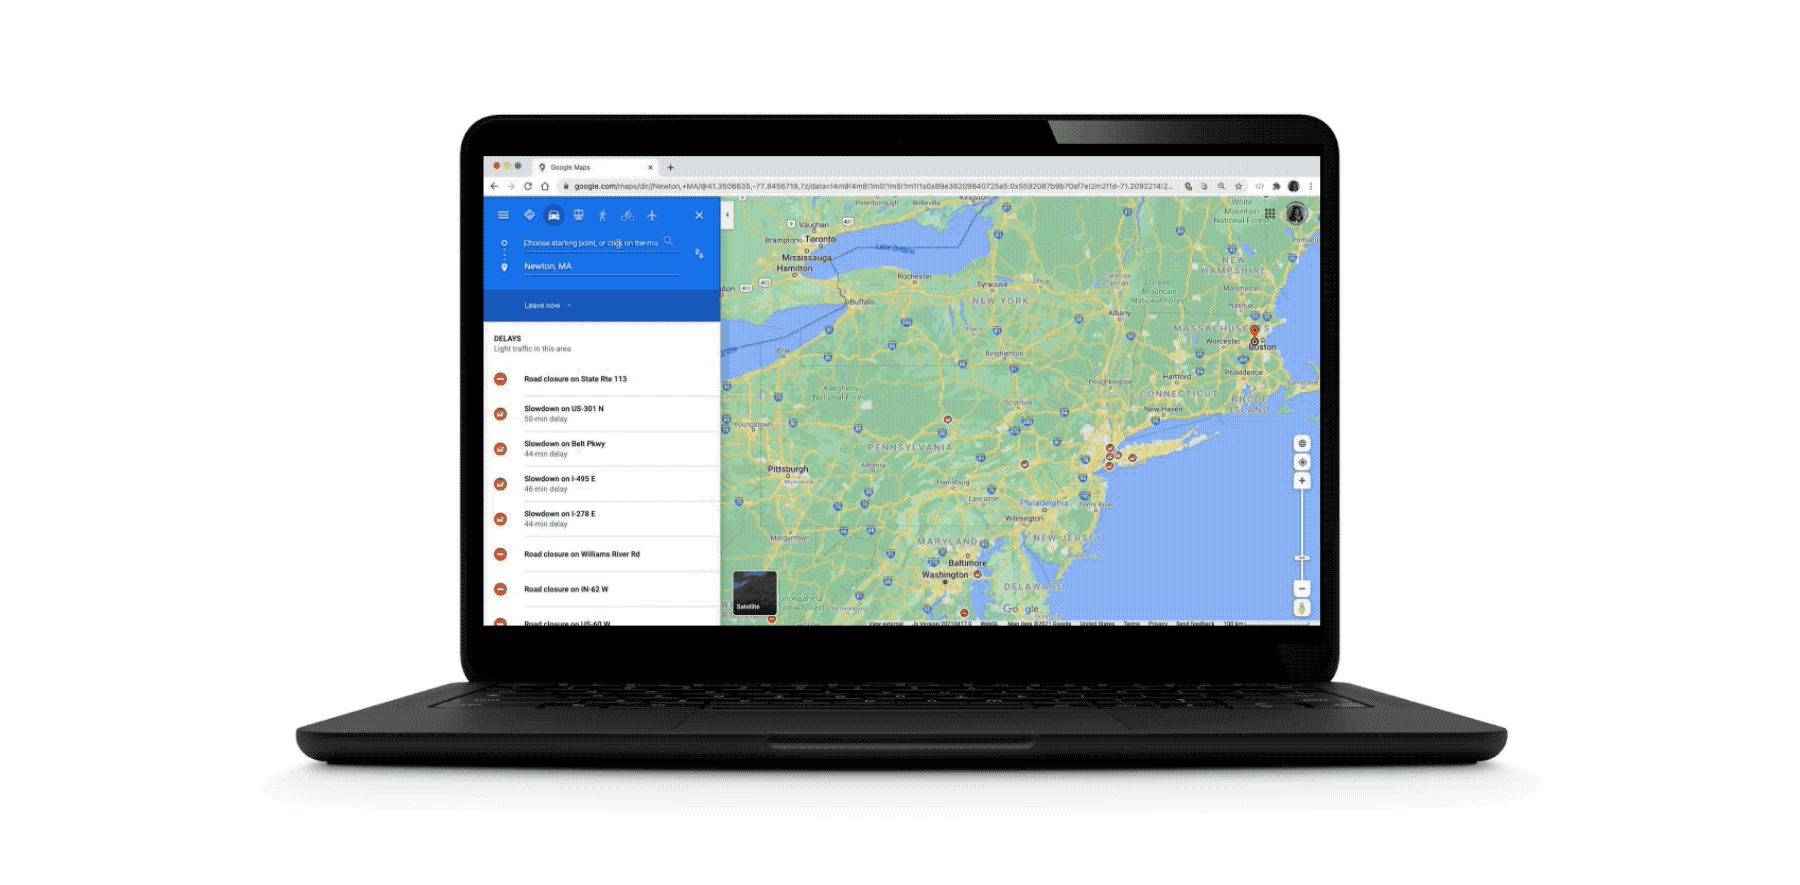 Animation showing road trip planning features on Google Maps